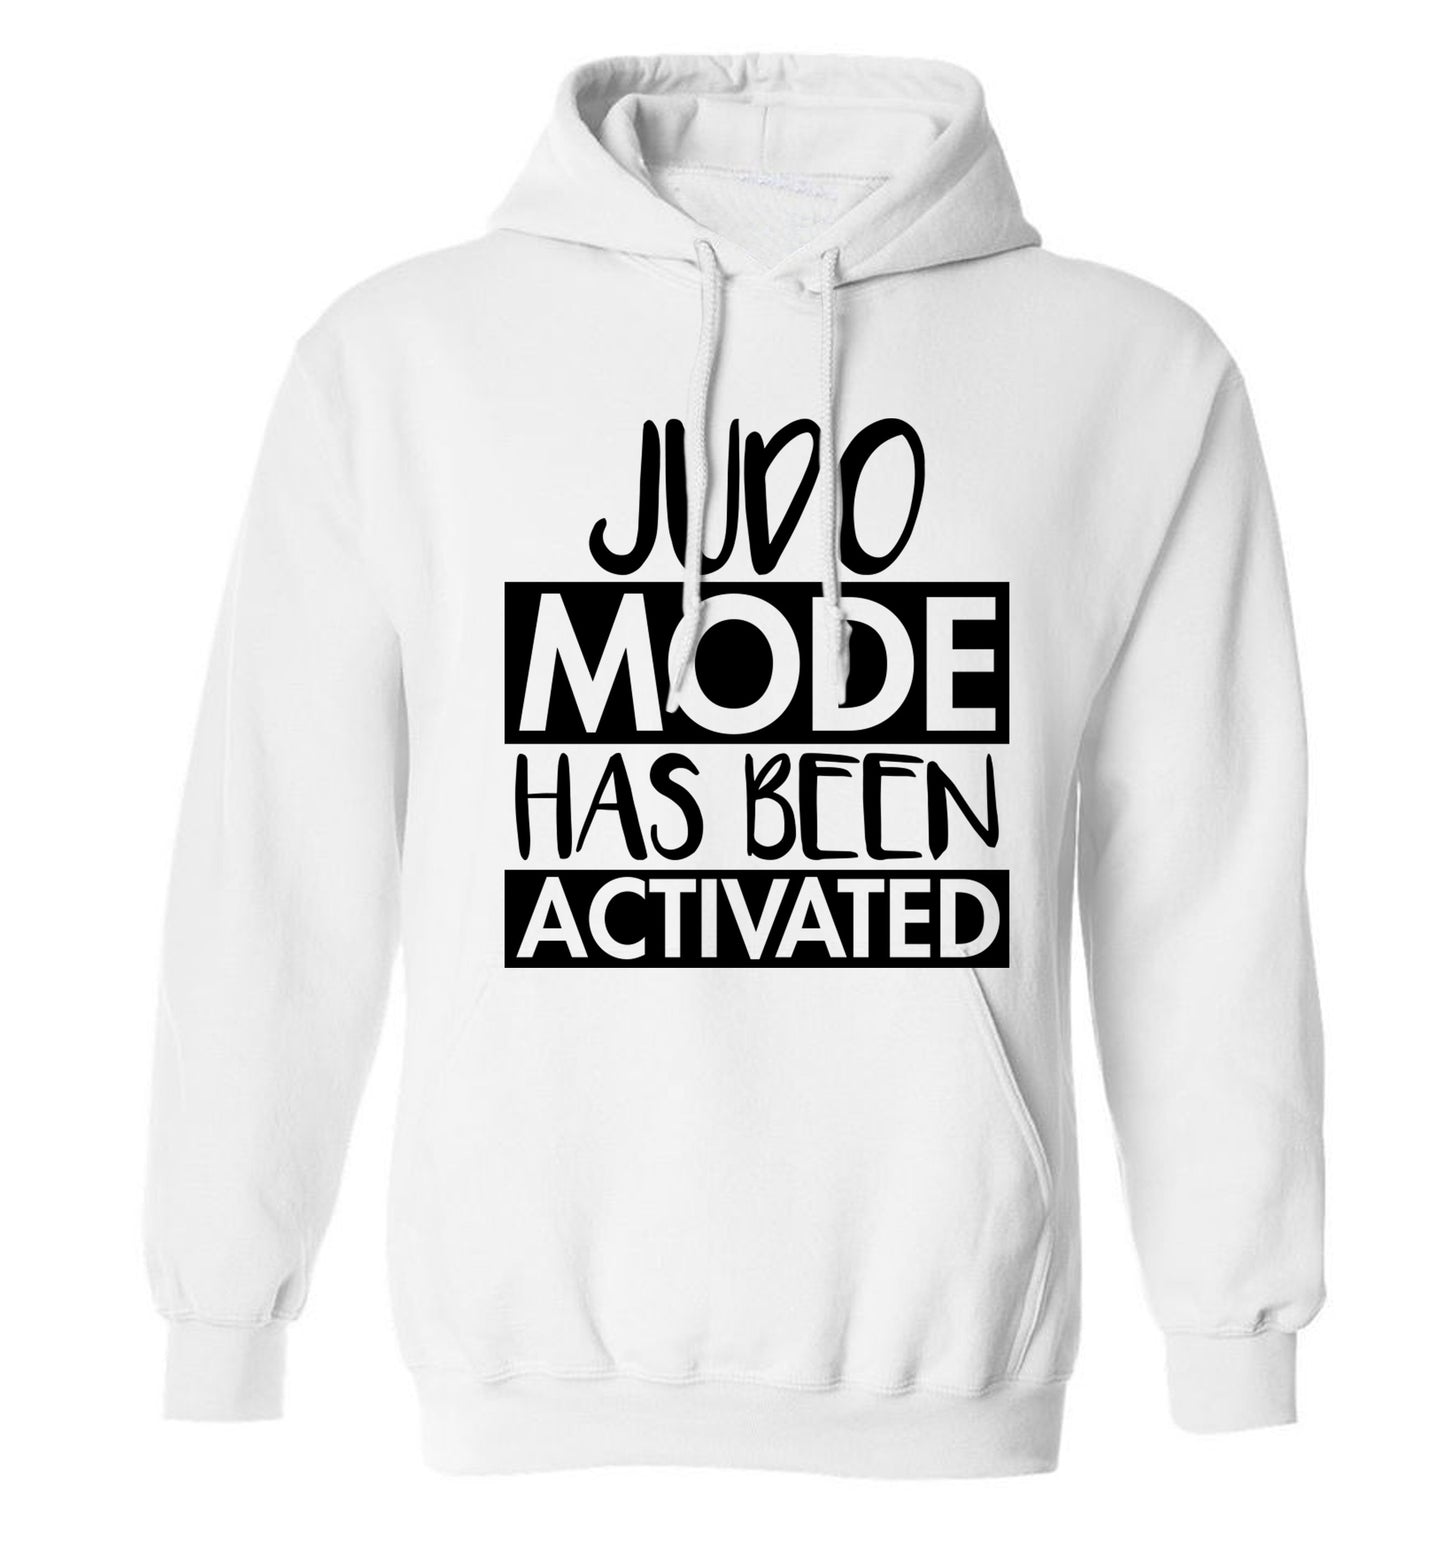 Judo mode activated adults unisex white hoodie 2XL